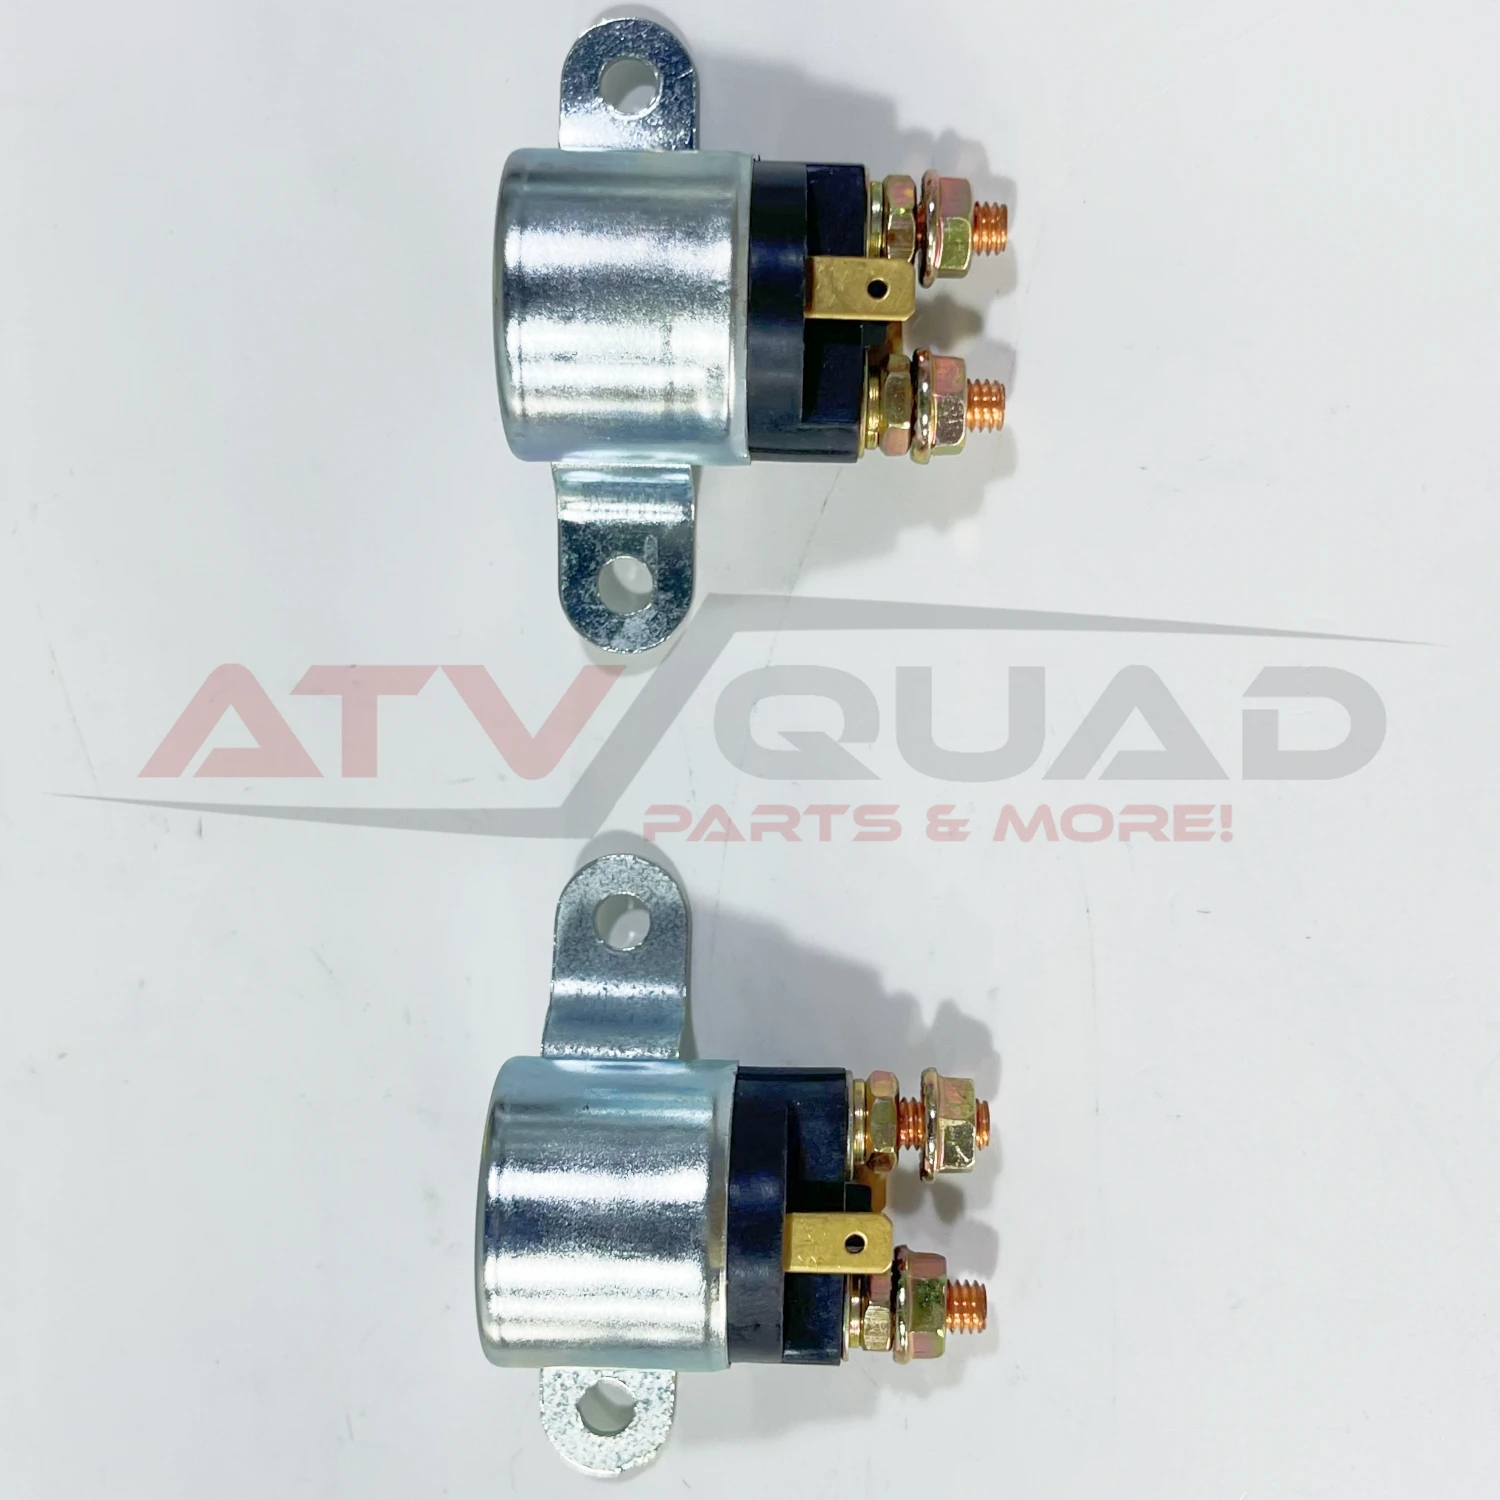 2PCS Solenoid Relay for Can-am Outlander Renegade 400 450 500 570 650 800 850 1000 Bombardier Traxter 500 DS650 Spyder GS 990 2pcs ru4s a220 ru4s a110 ru2s a220 ru2s a110 ru4s d d24 ru2s d d24 ru4s a24 ru2s a24 relay